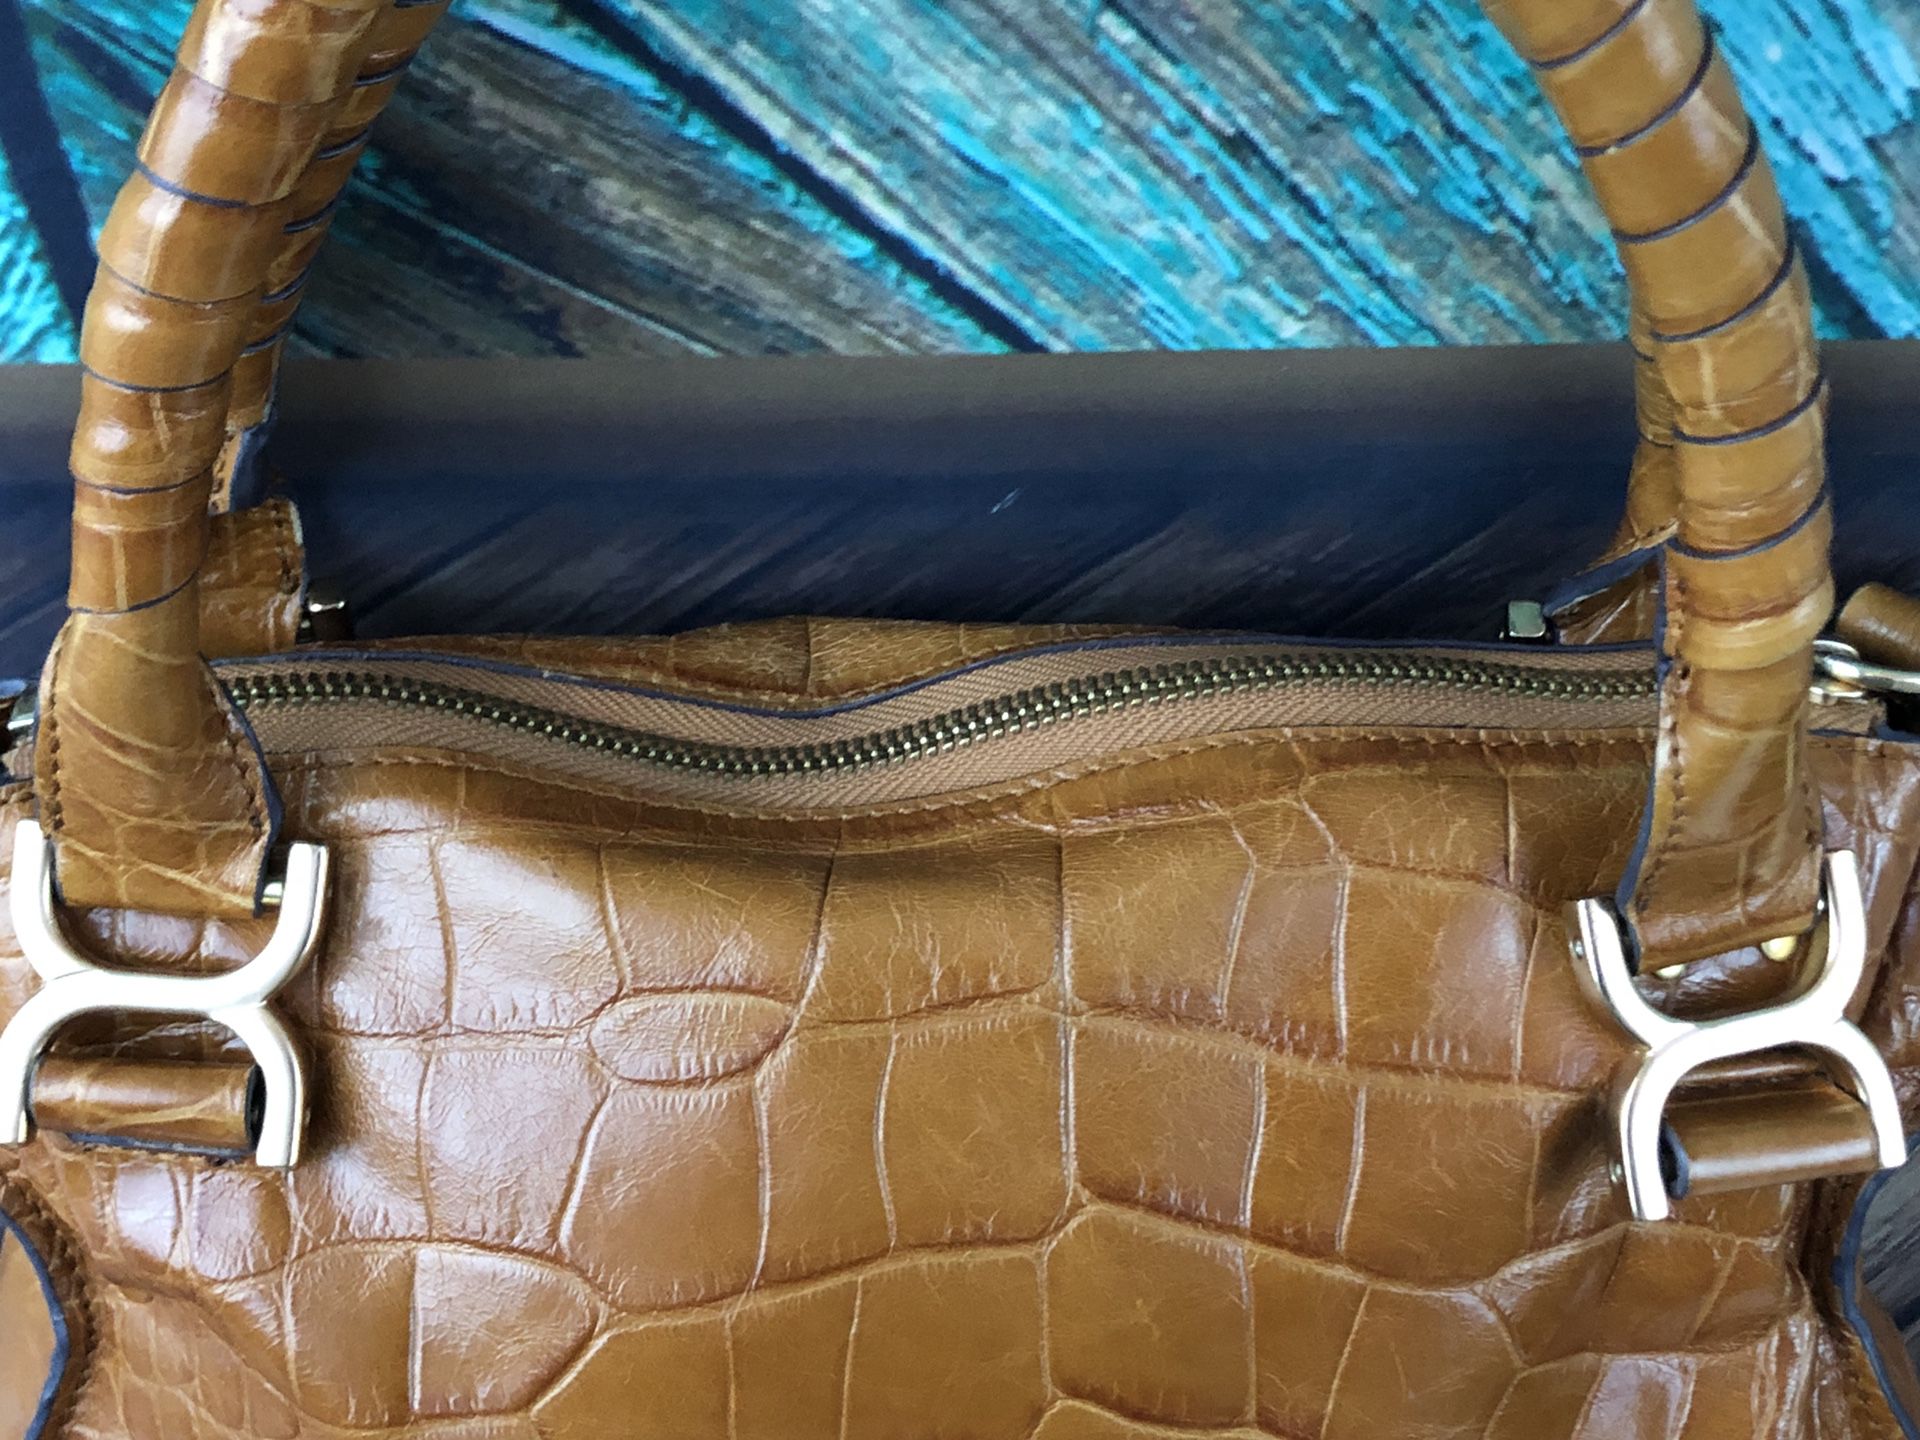 Chloé Marcie Embossed Leather Bag